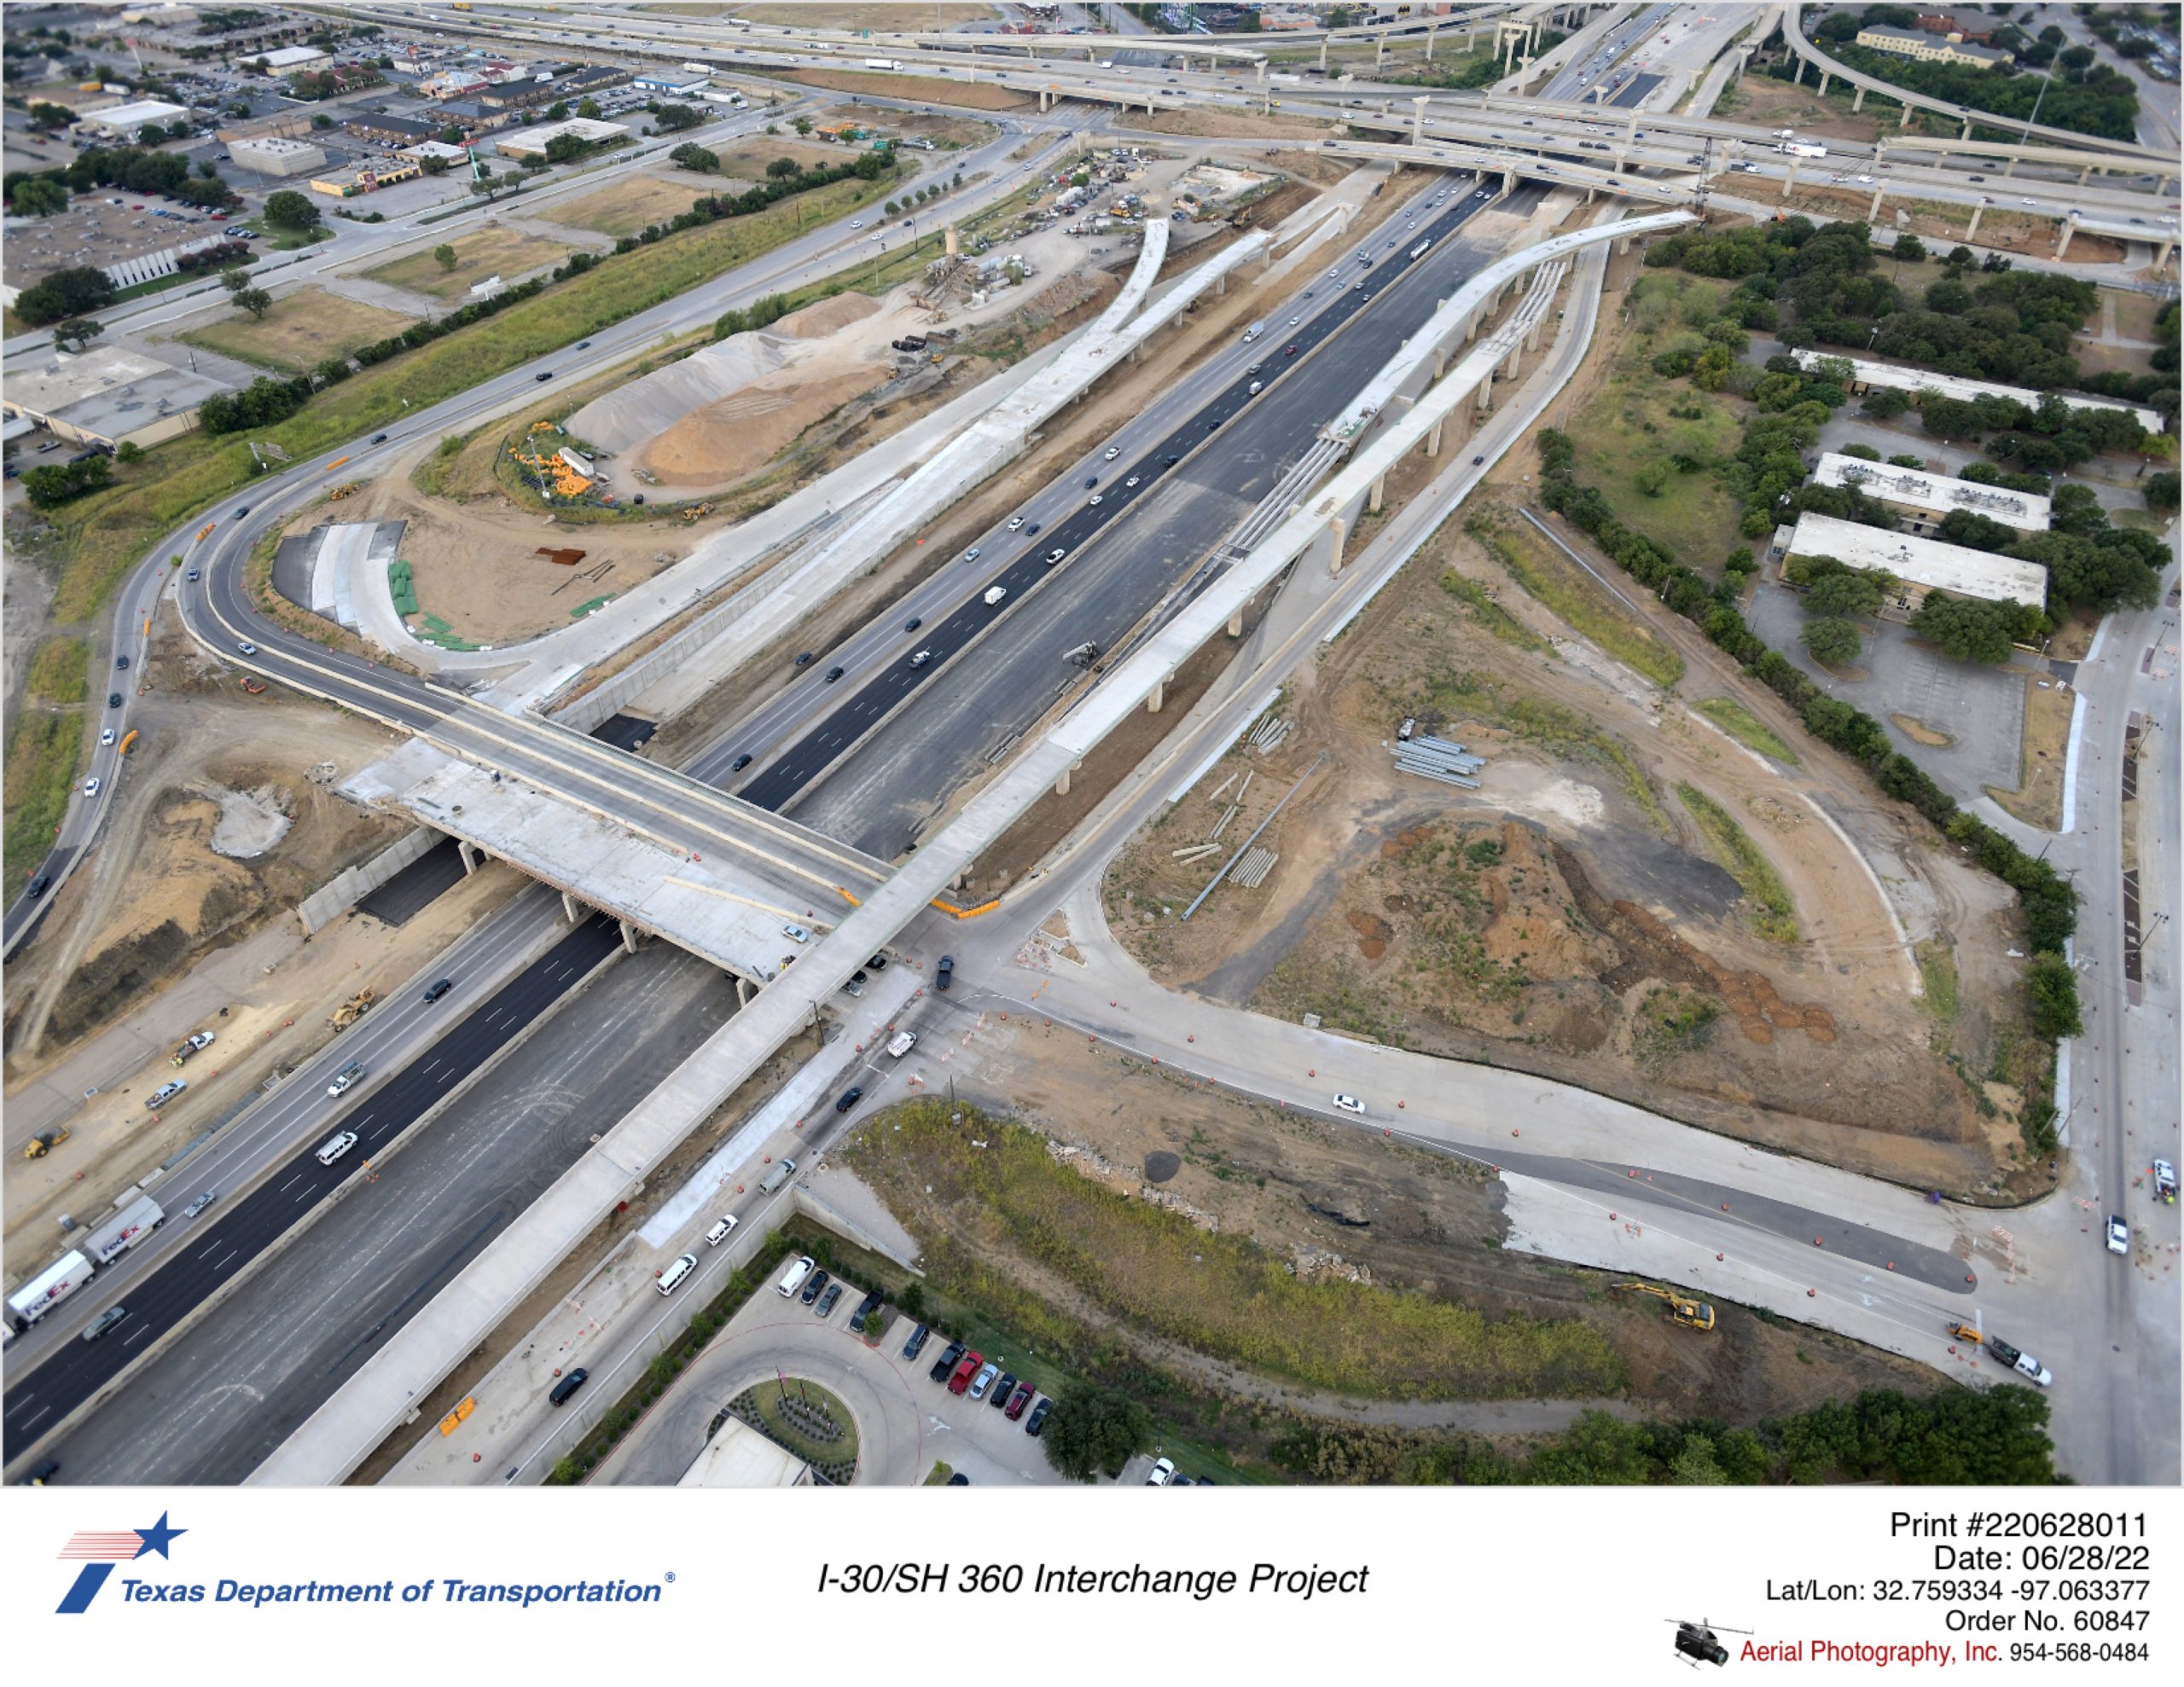 I-30/Six Flags Dr interchange looking southwest. Bridge construction over I-30 and pavement construction between I-30 and Lamar Blvd is shown.